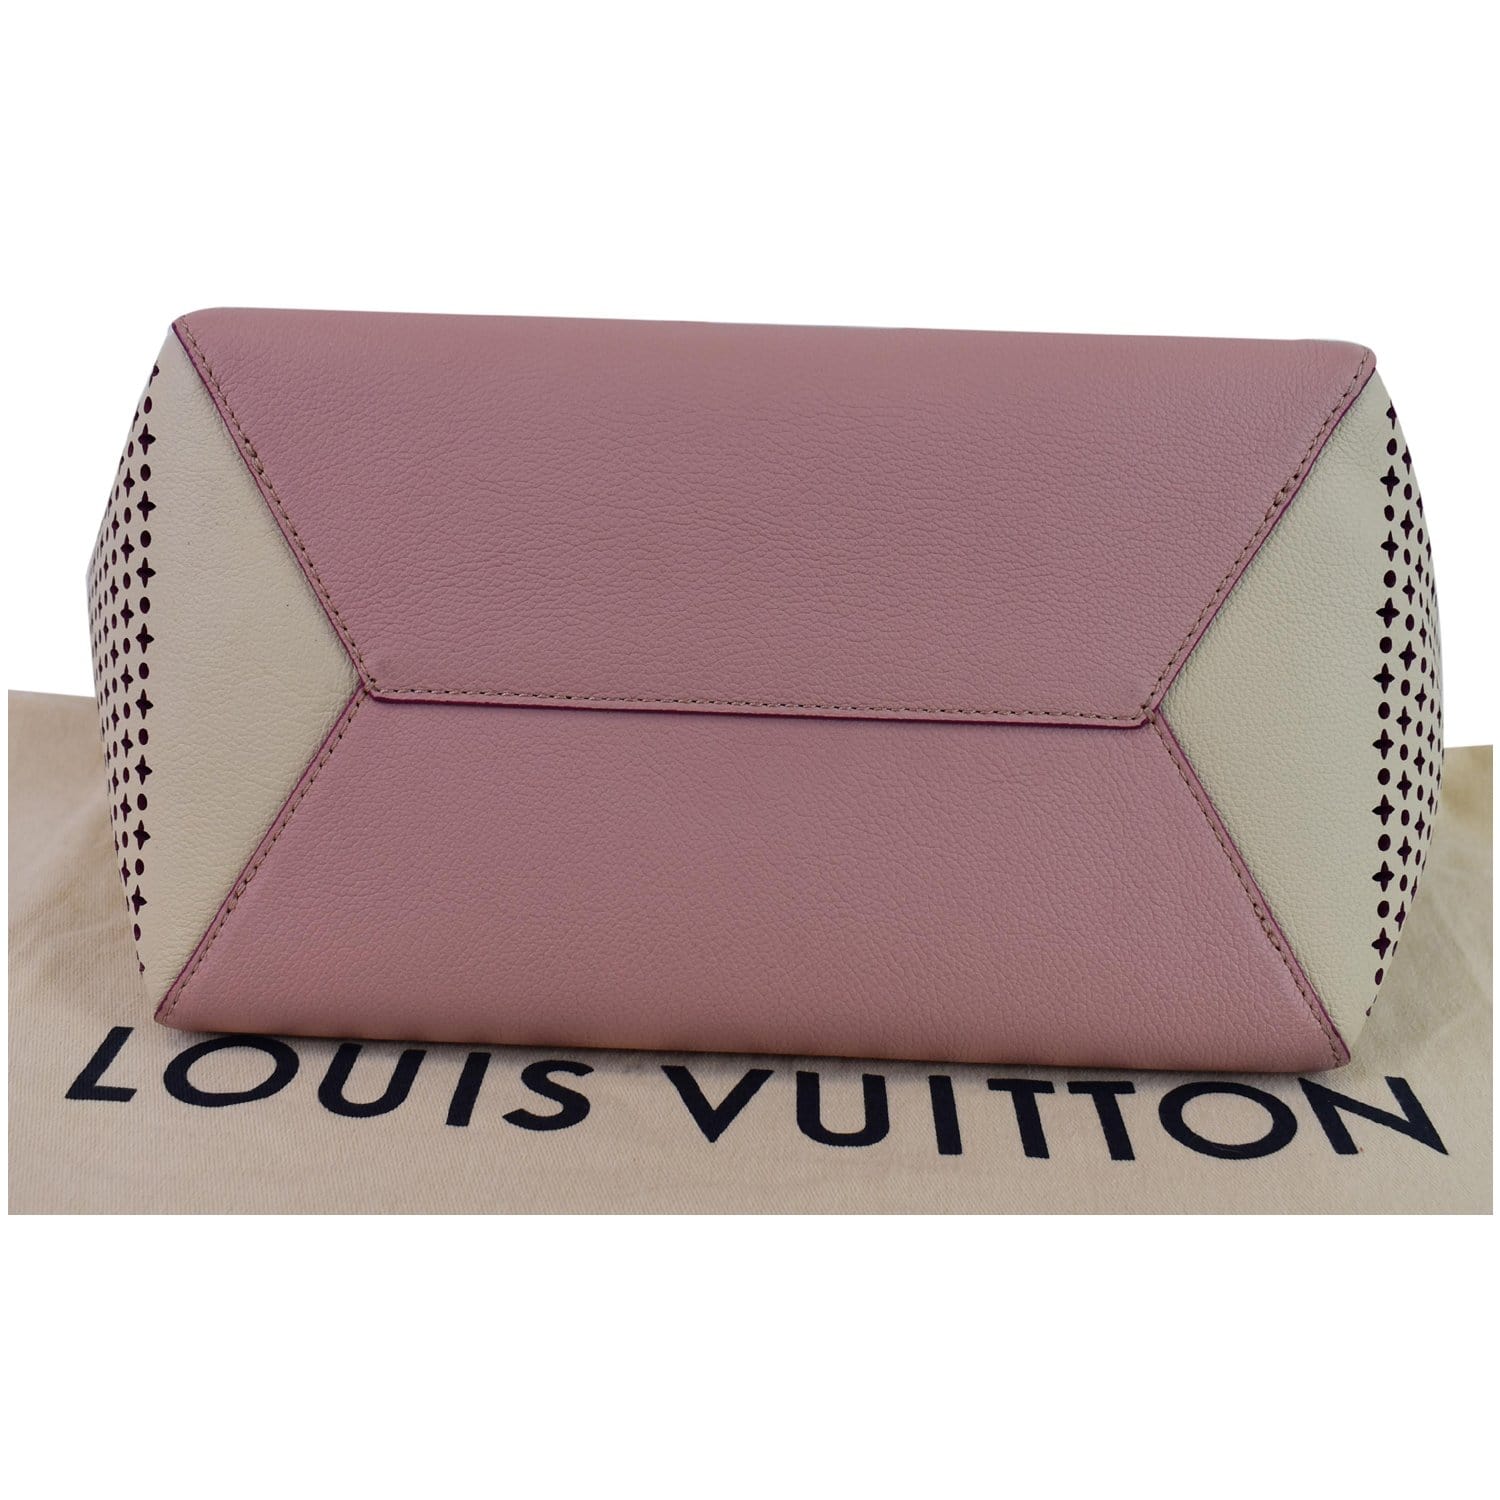 louis vuitton from dhgate pink leather｜TikTok Search